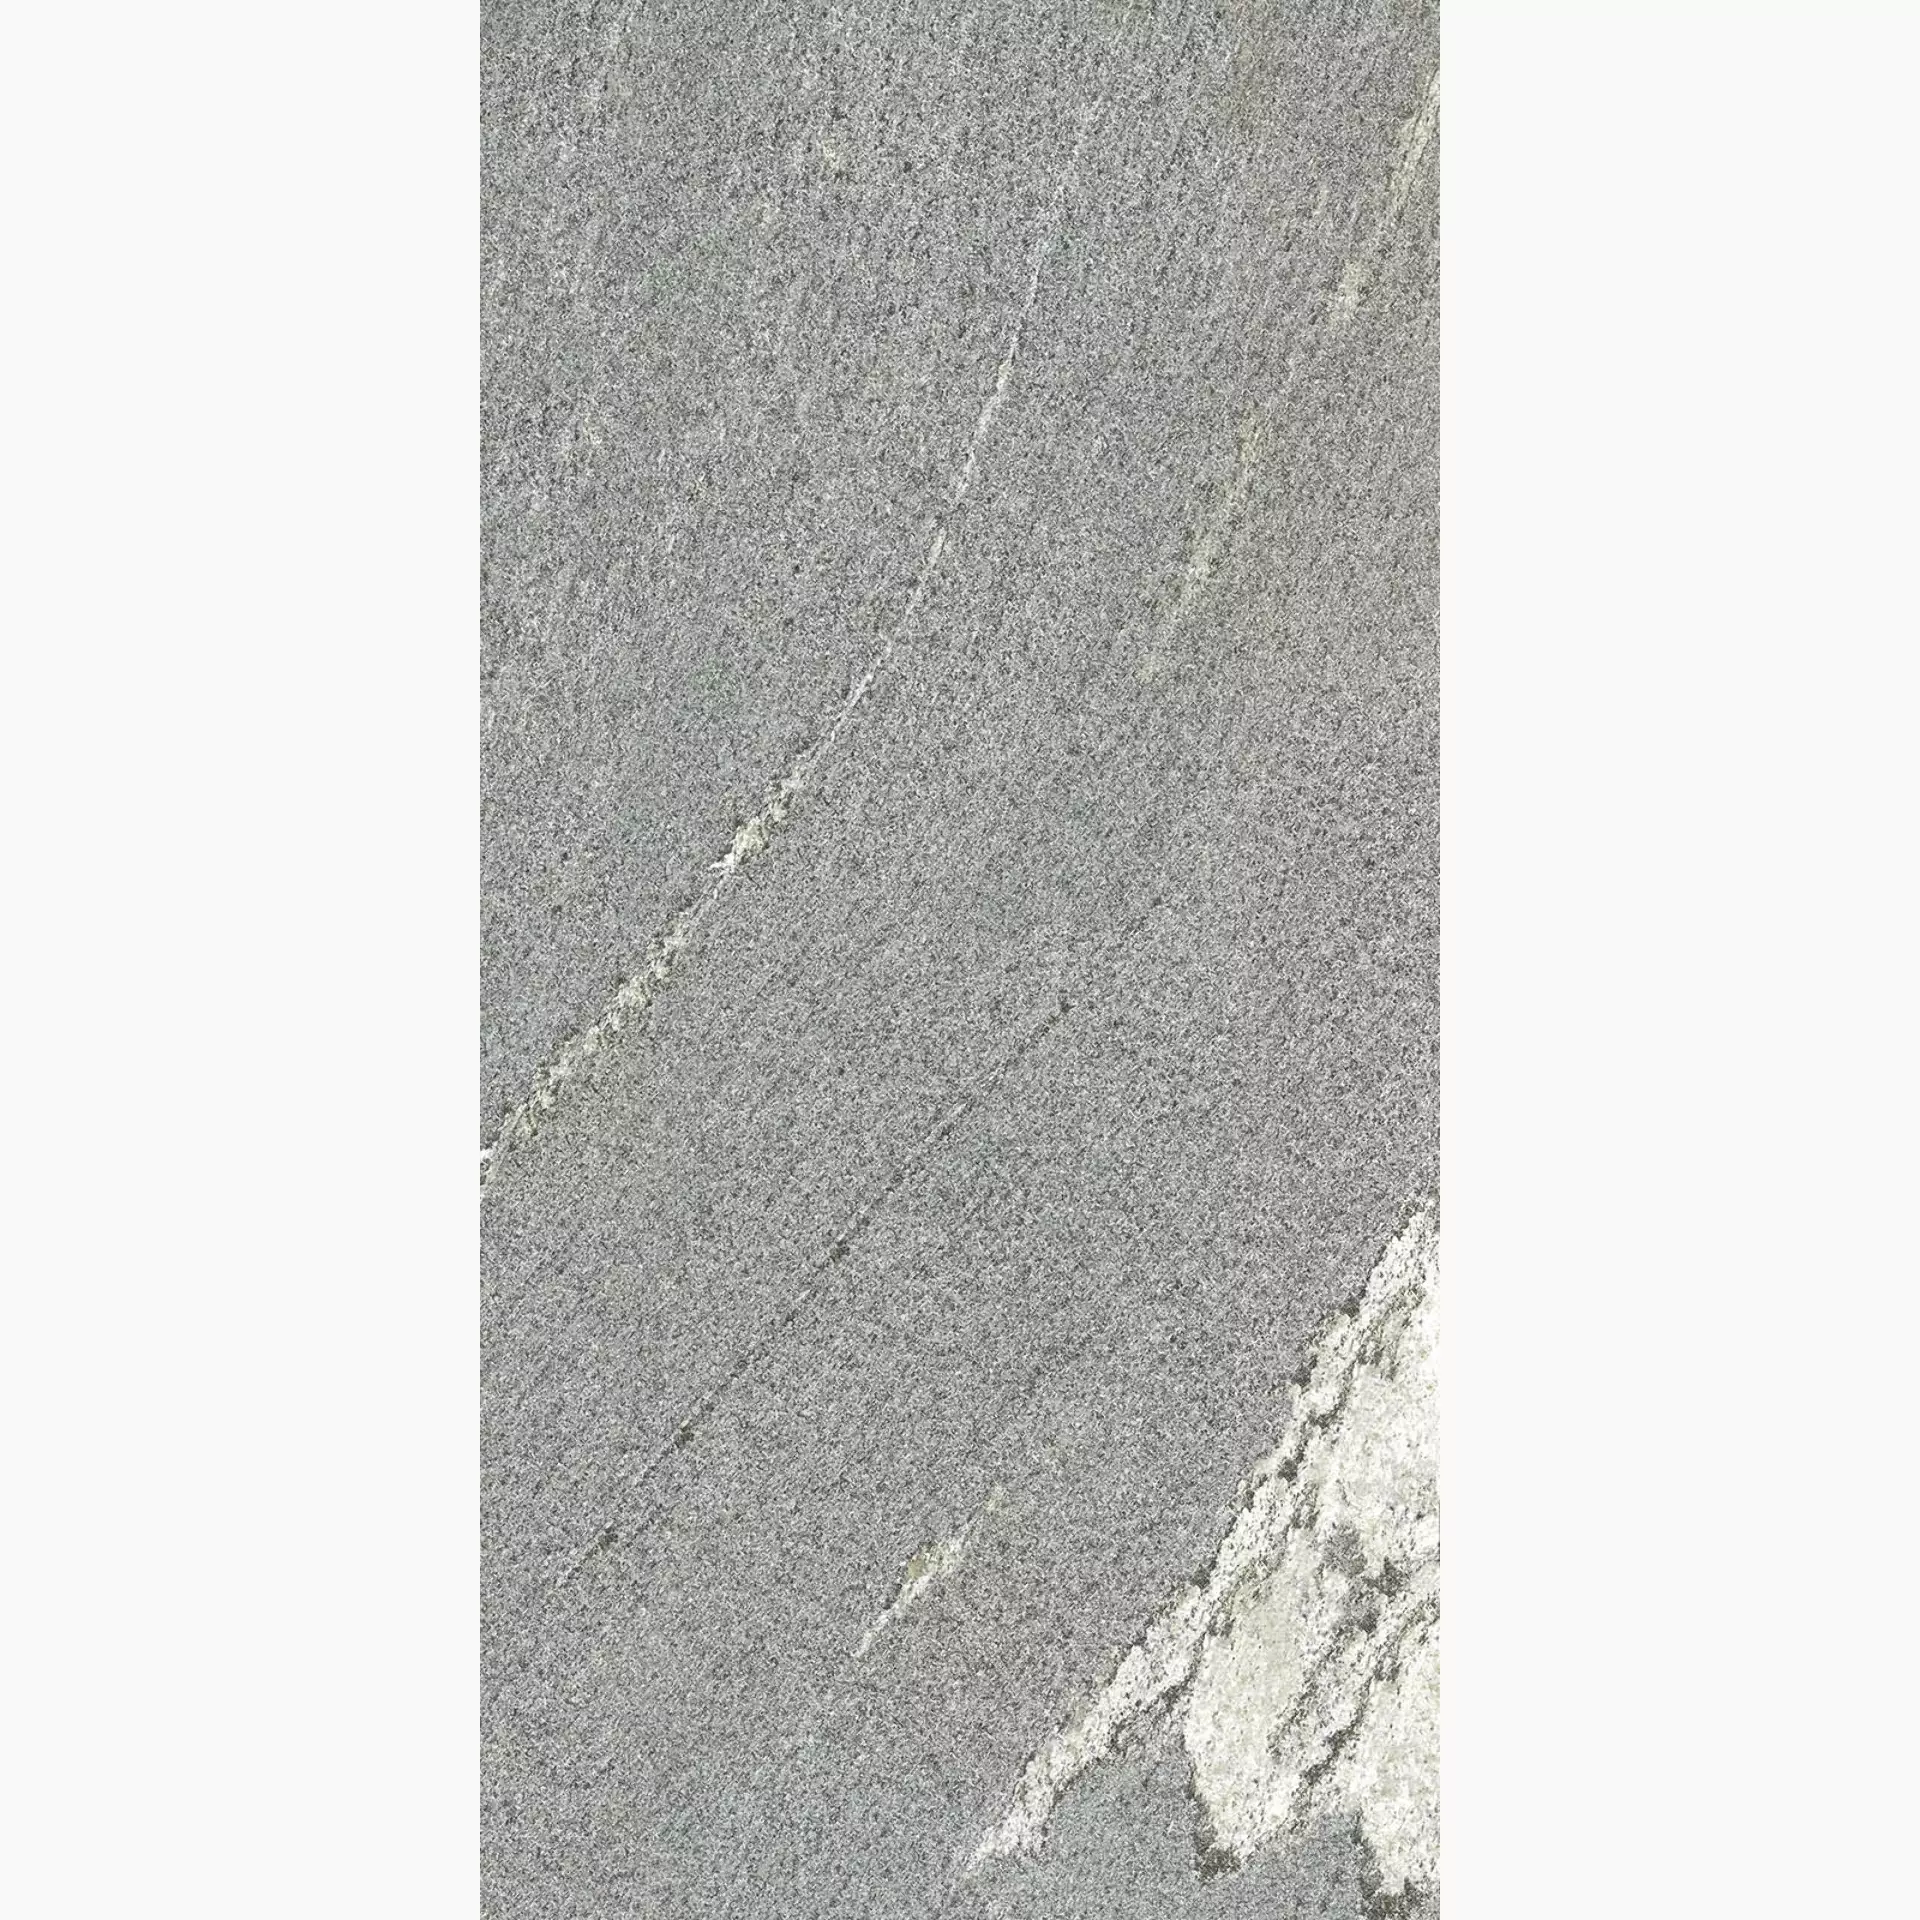 Keope Percorsi Frame Gneiss Grey Spazzolato 474A5732 60x120cm rectified 20mm